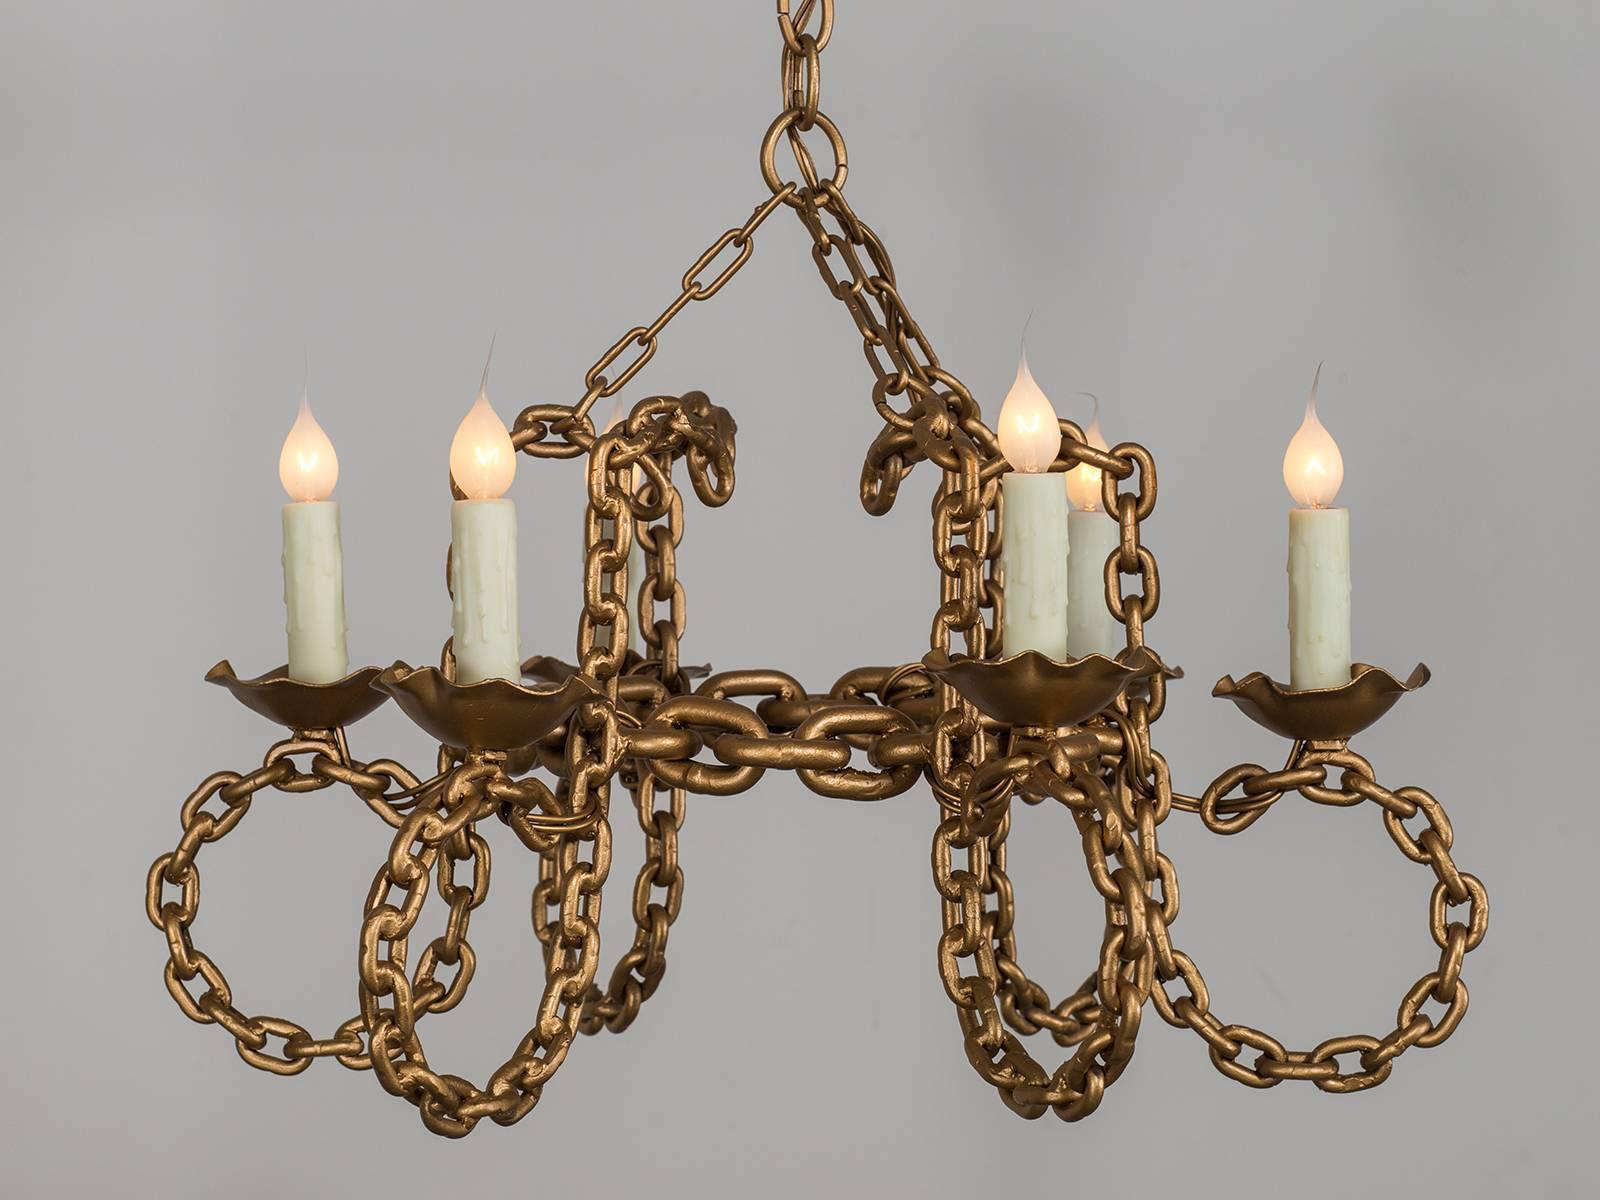 Receive our new selections direct from 1stdibs by email each week. Please click Follow Dealer below and see them first!

This quirky vintage French chandelier circa 1930 is made entirely of forged iron chain that has been welded into place and